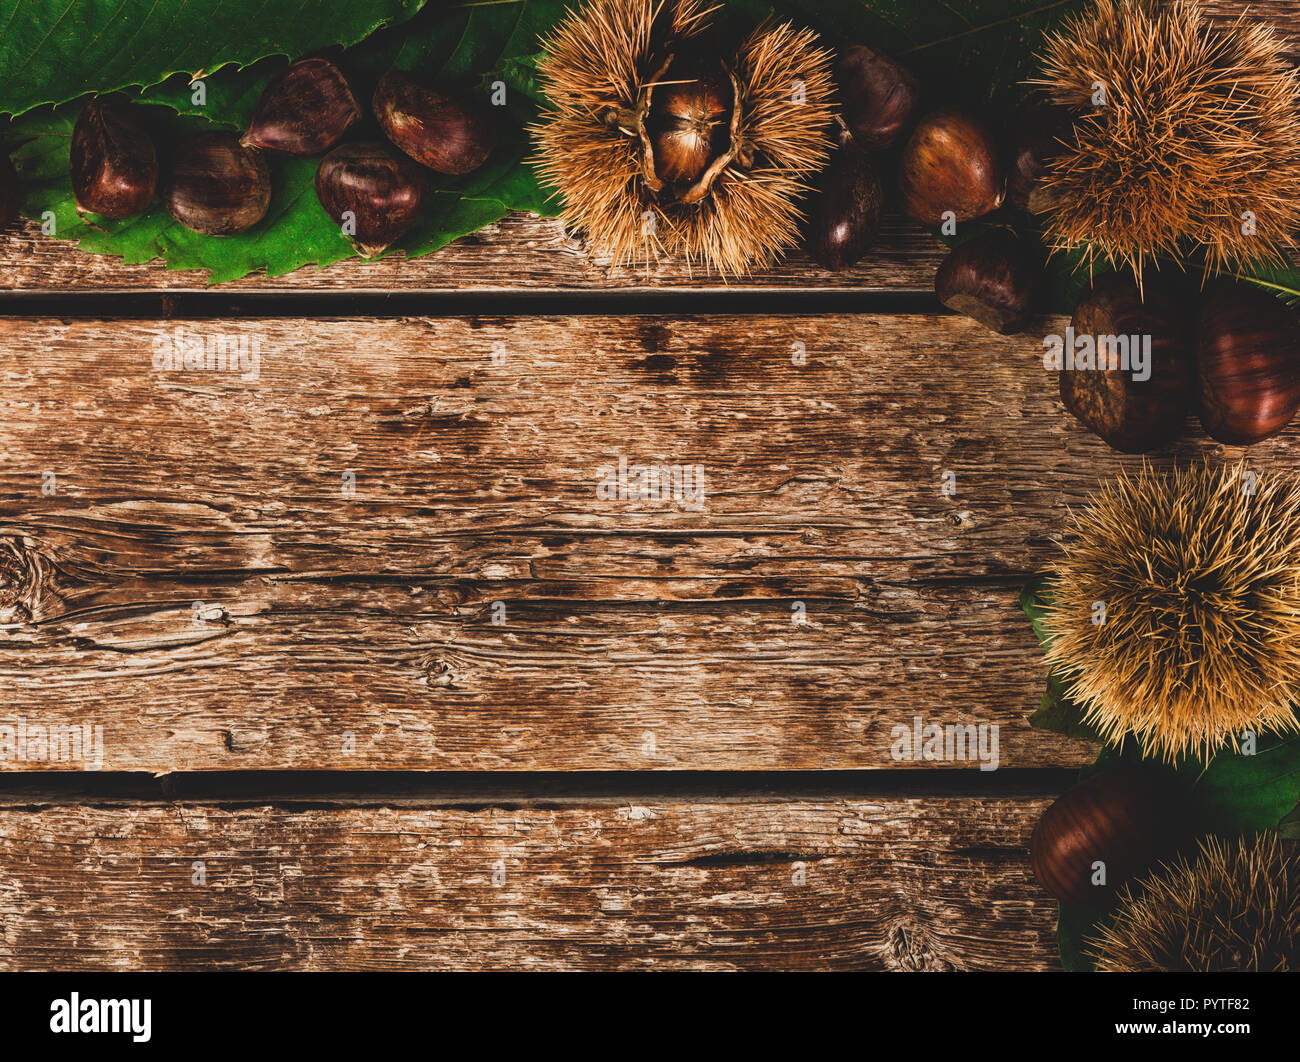 Frame of chestnuts, leaves and chestnut bur on wooden table. Stock Photo